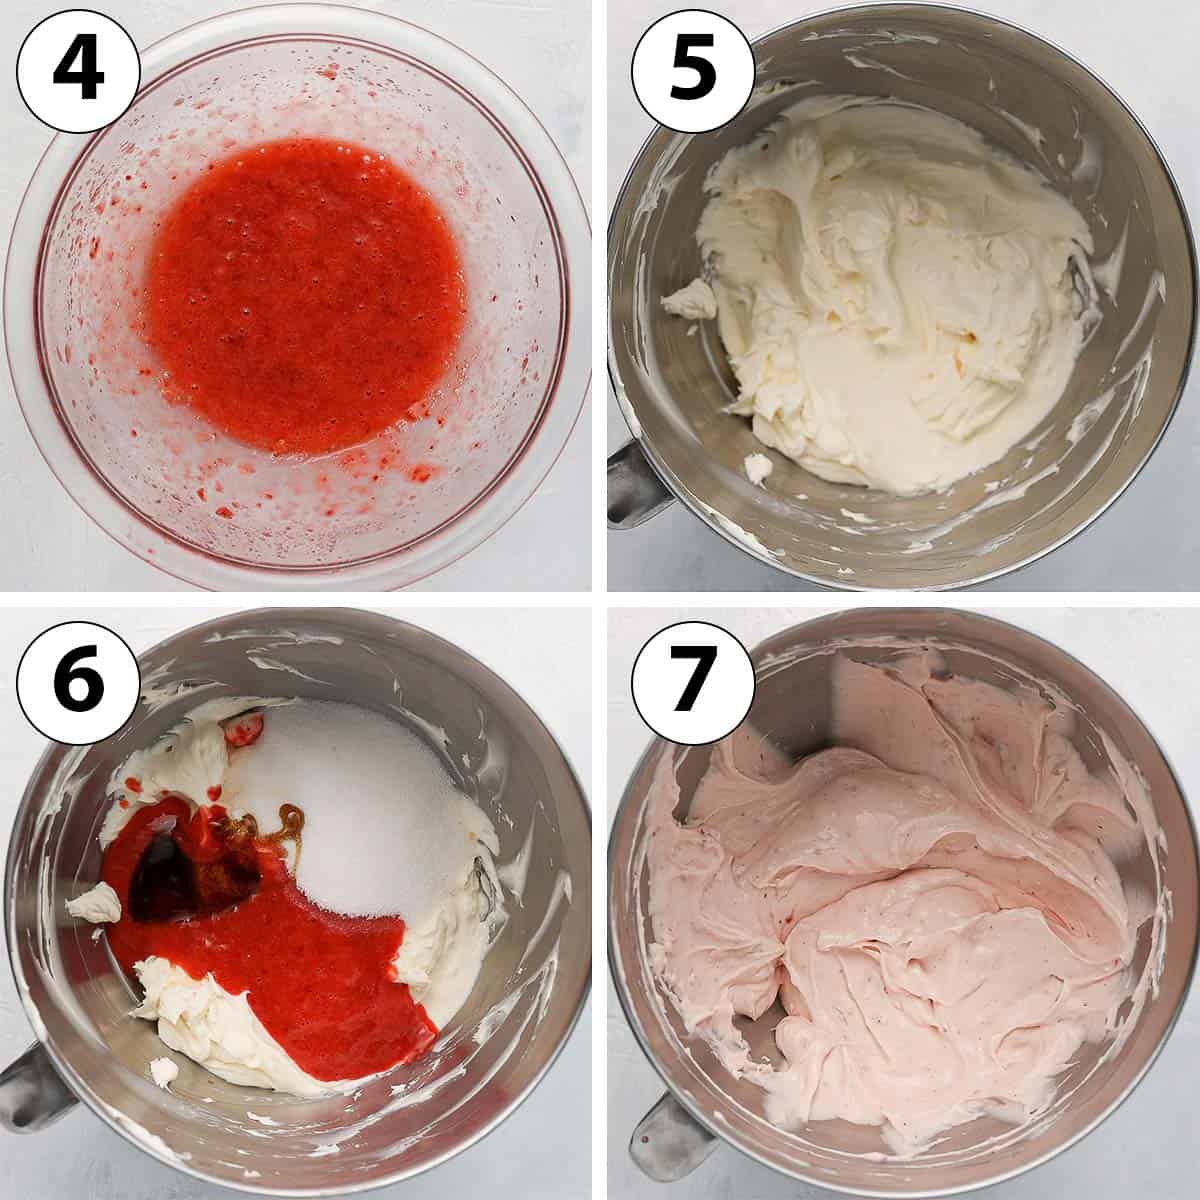 Process Shot Collage: making the strawberry puree and mixing the cheesecake batter ingredients.